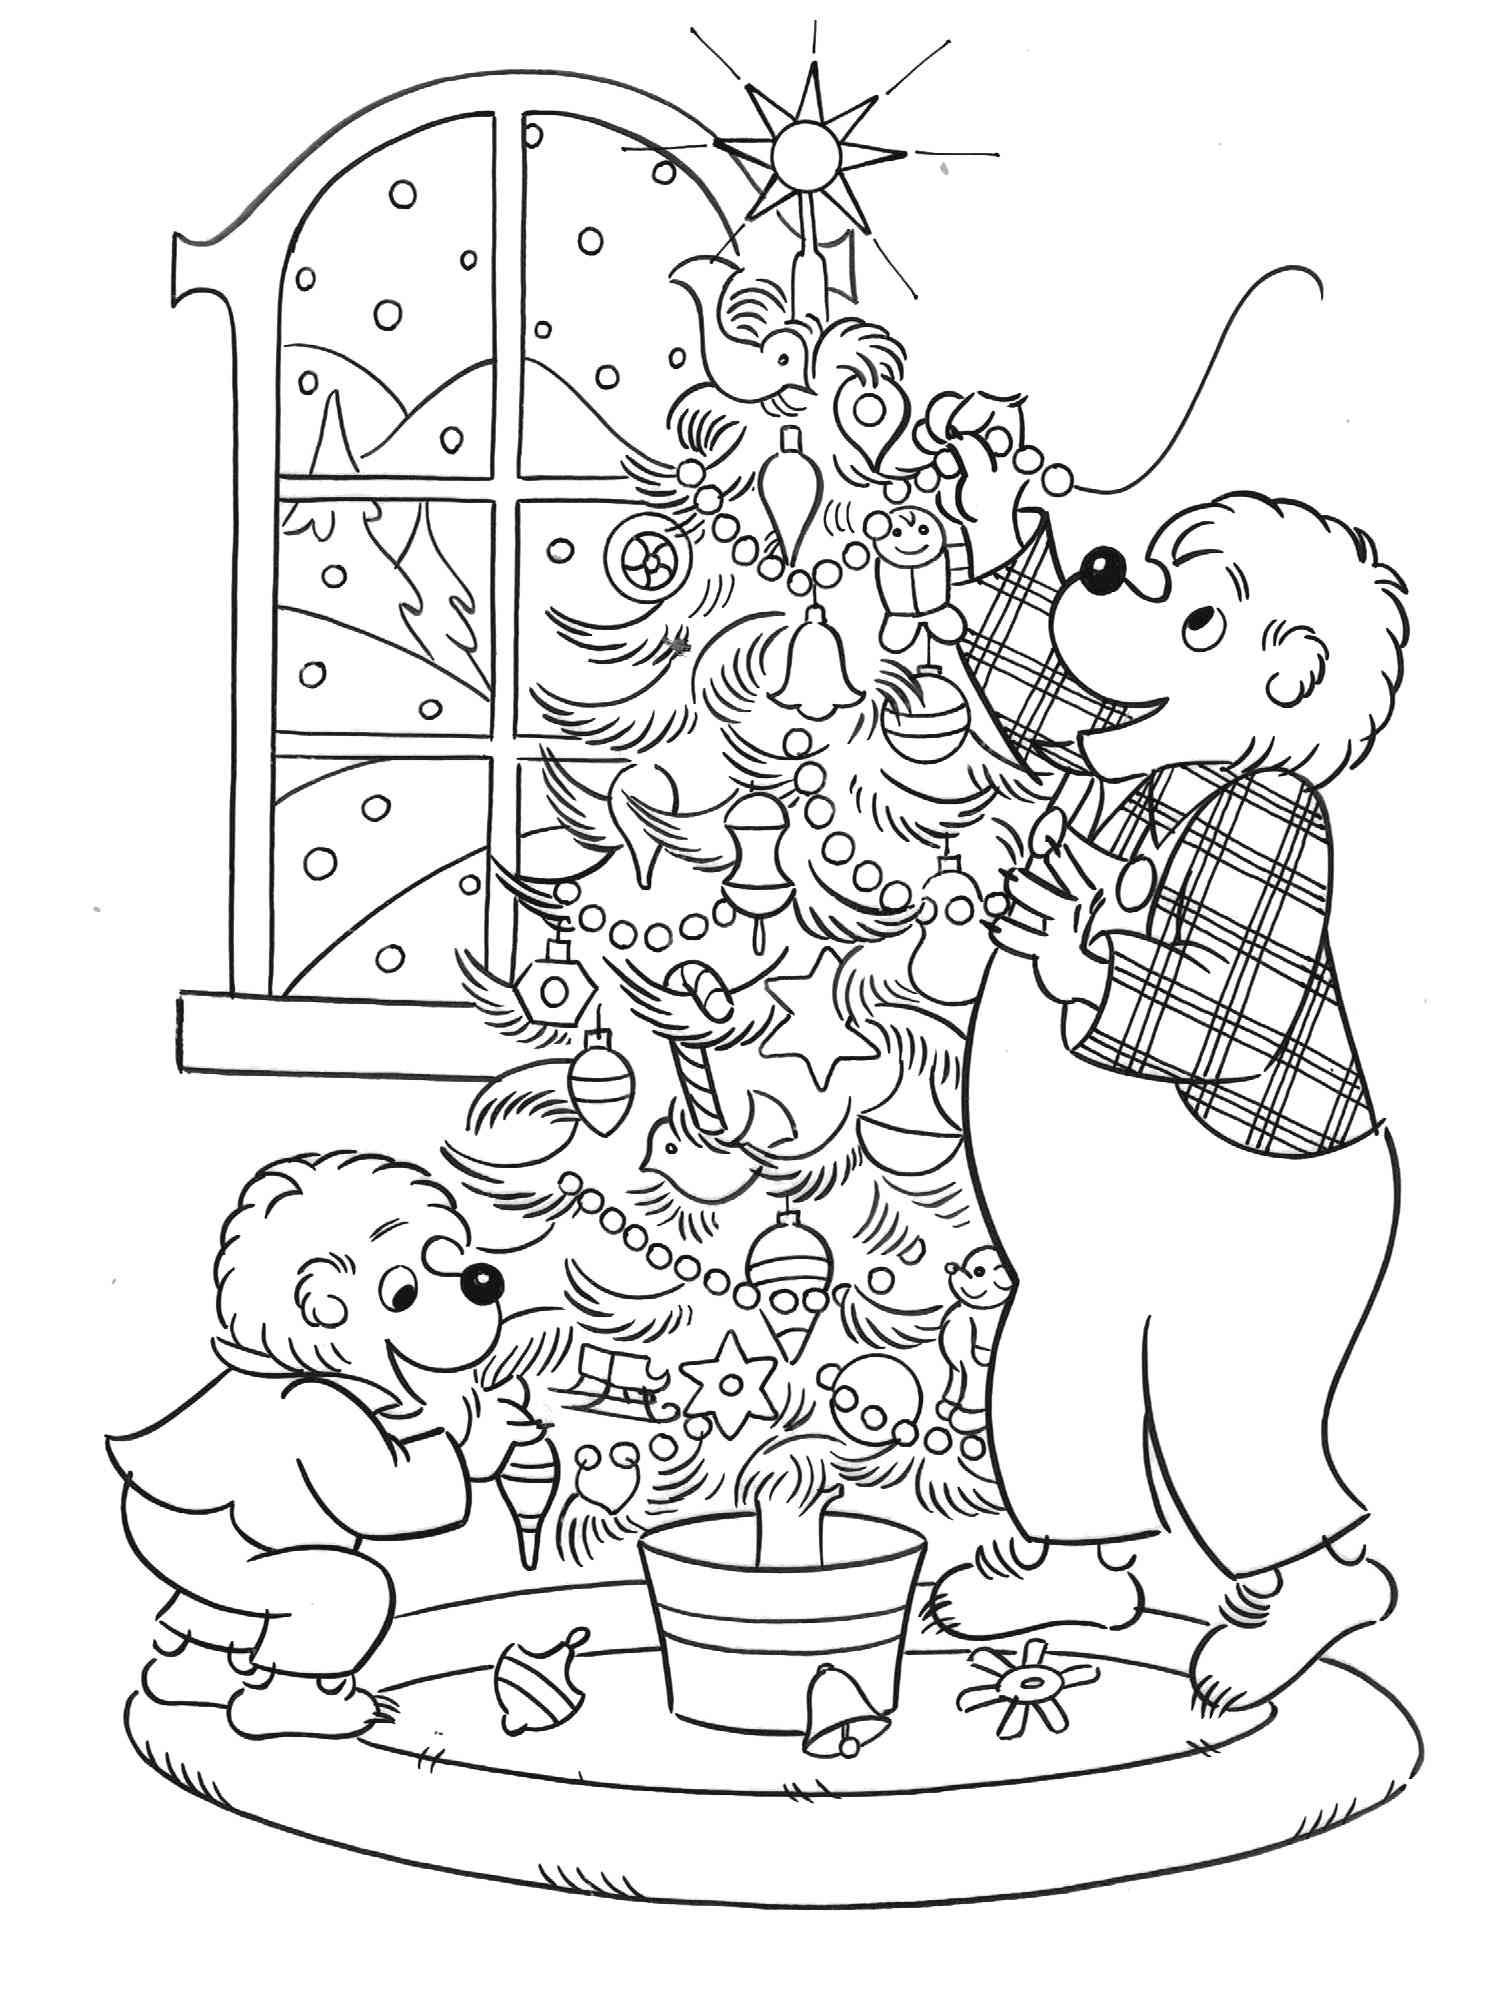 Berenstain Bears Christmas coloring page